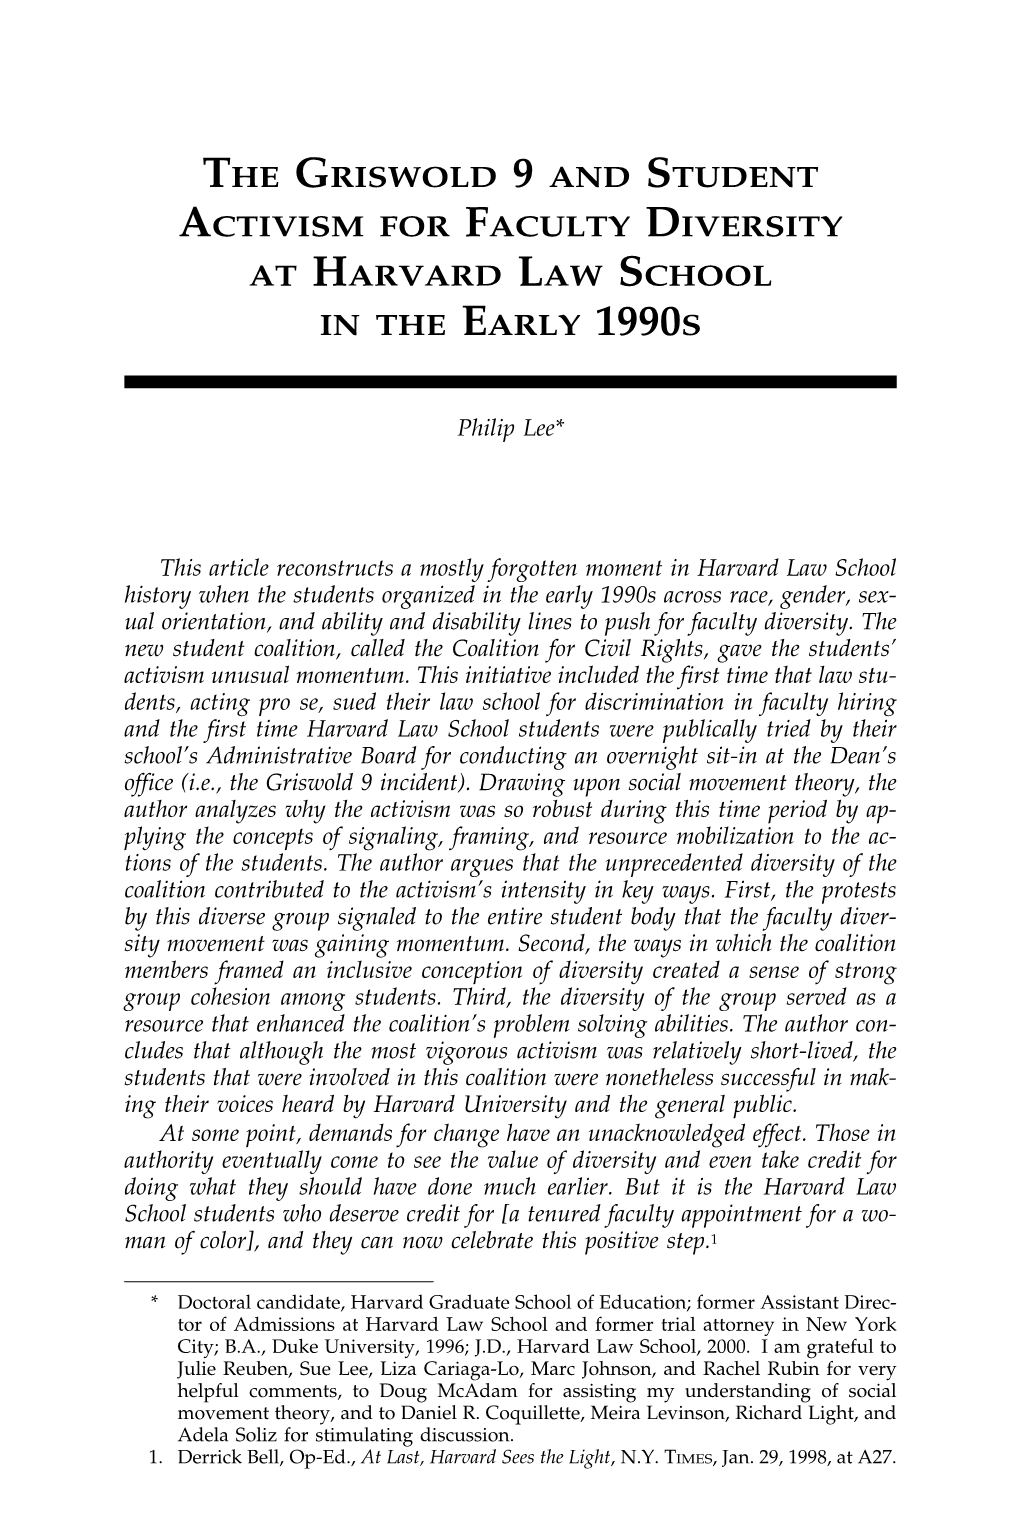 The Griswold 9 and Student Activism for Faculty Diversity at Harvard Law School in the Early 1990S